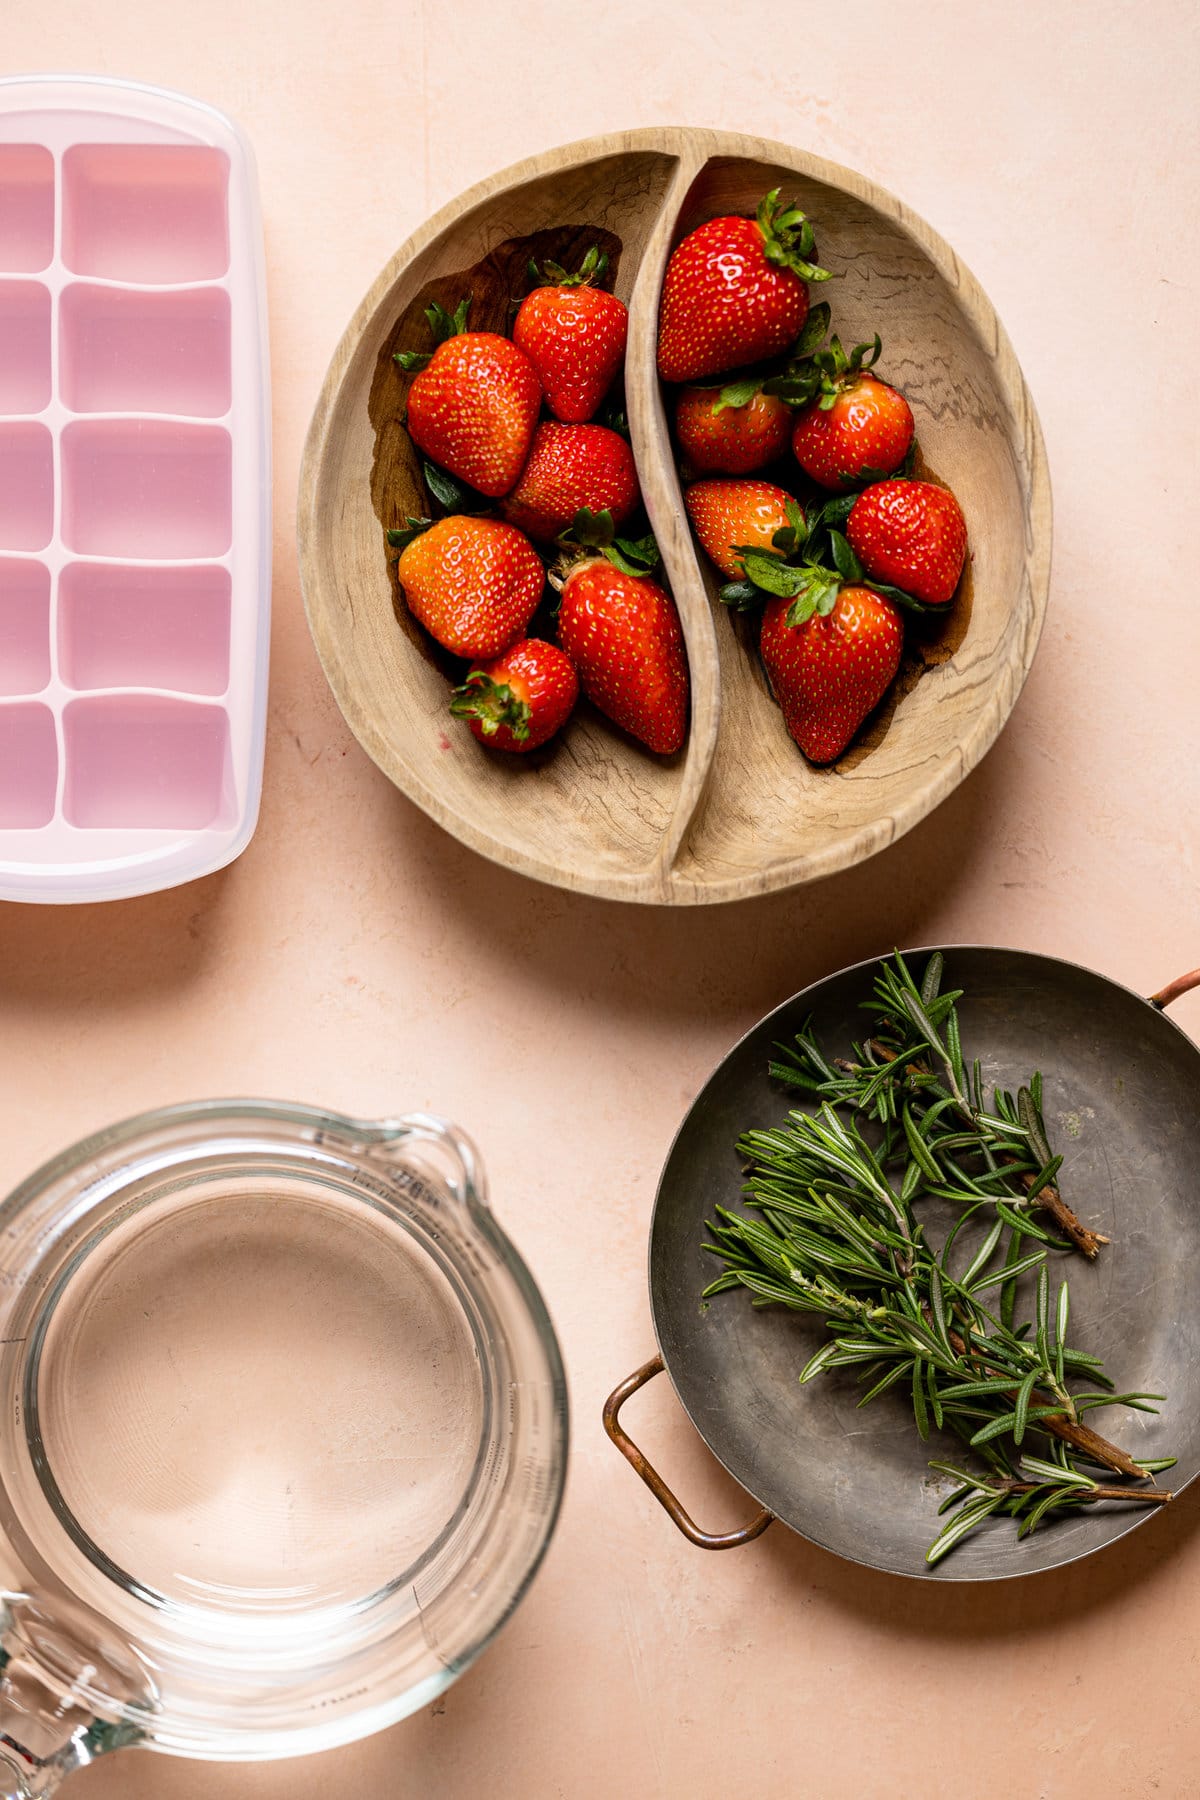 Strawberries, rosemary, and the equipment to turn them into ice cubes